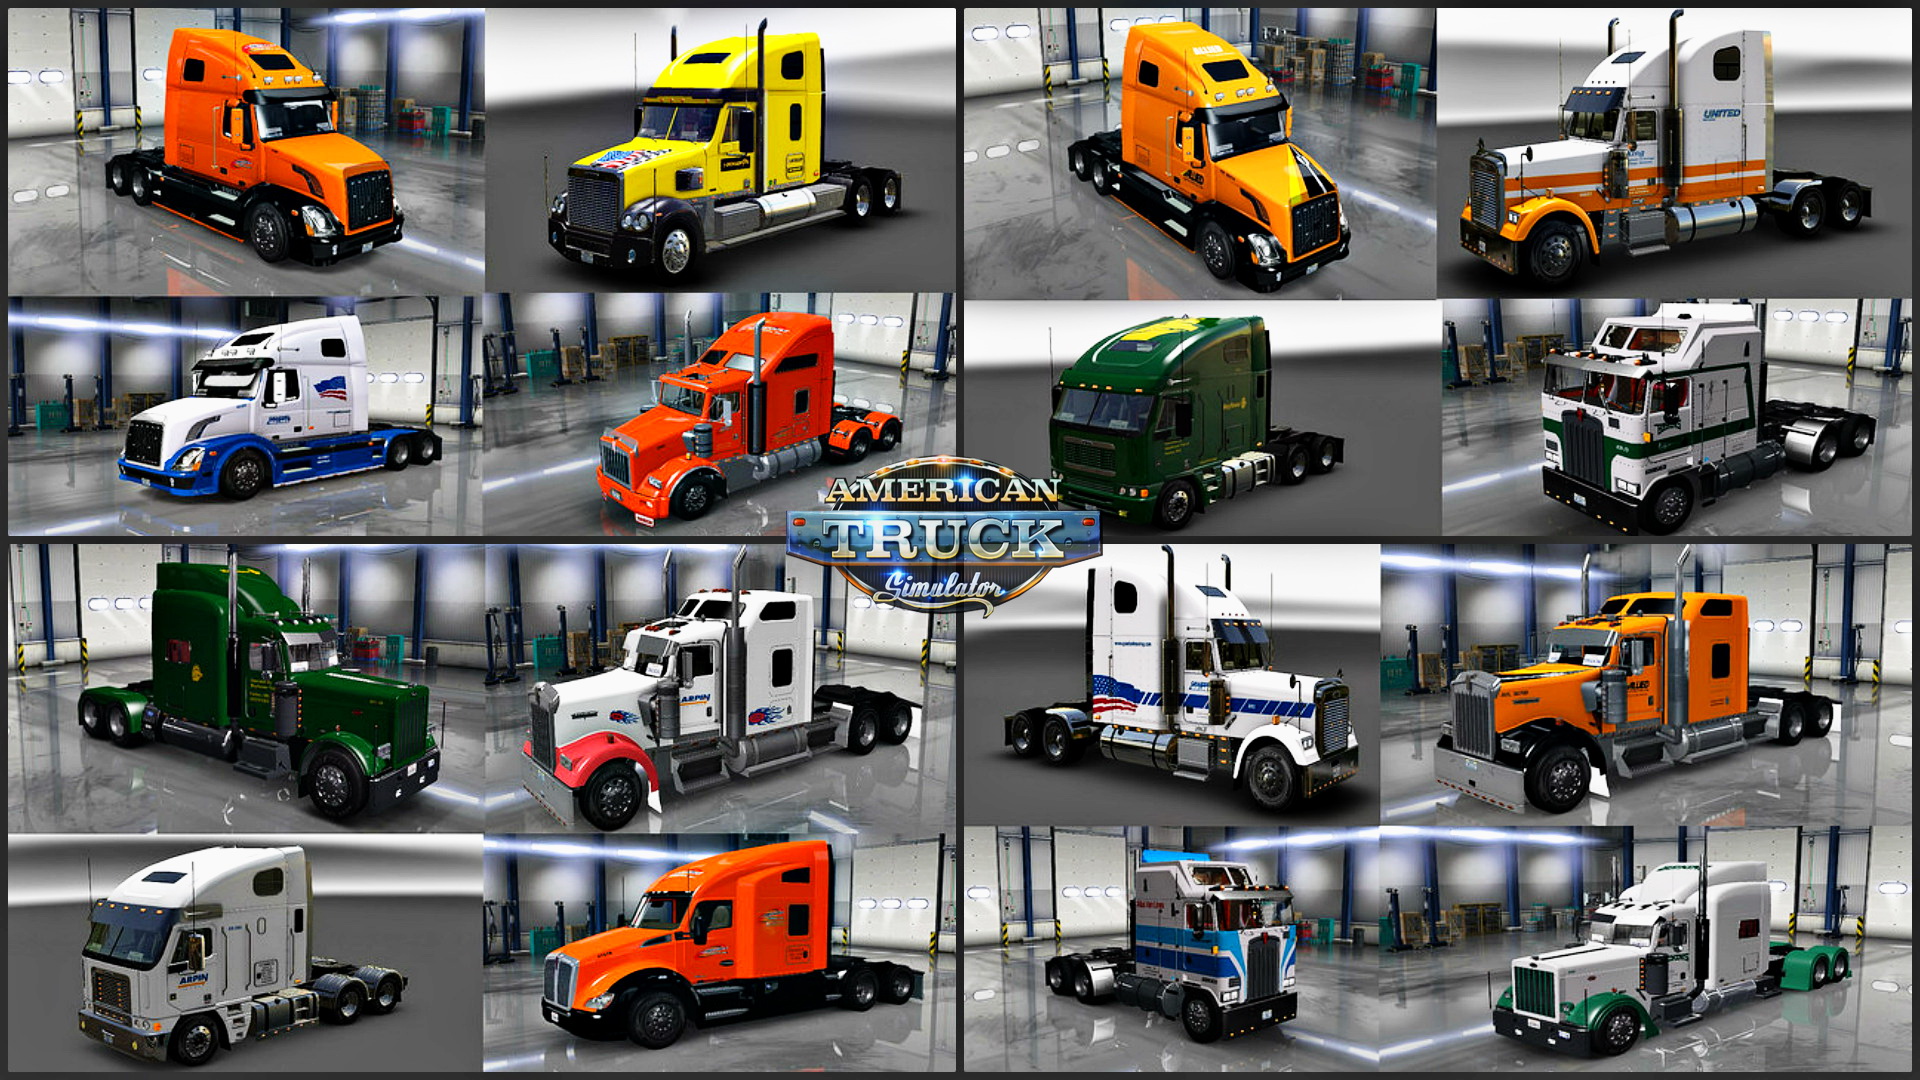 Long Distance Movers Truck Skins Pack v1.0 by Hounddog